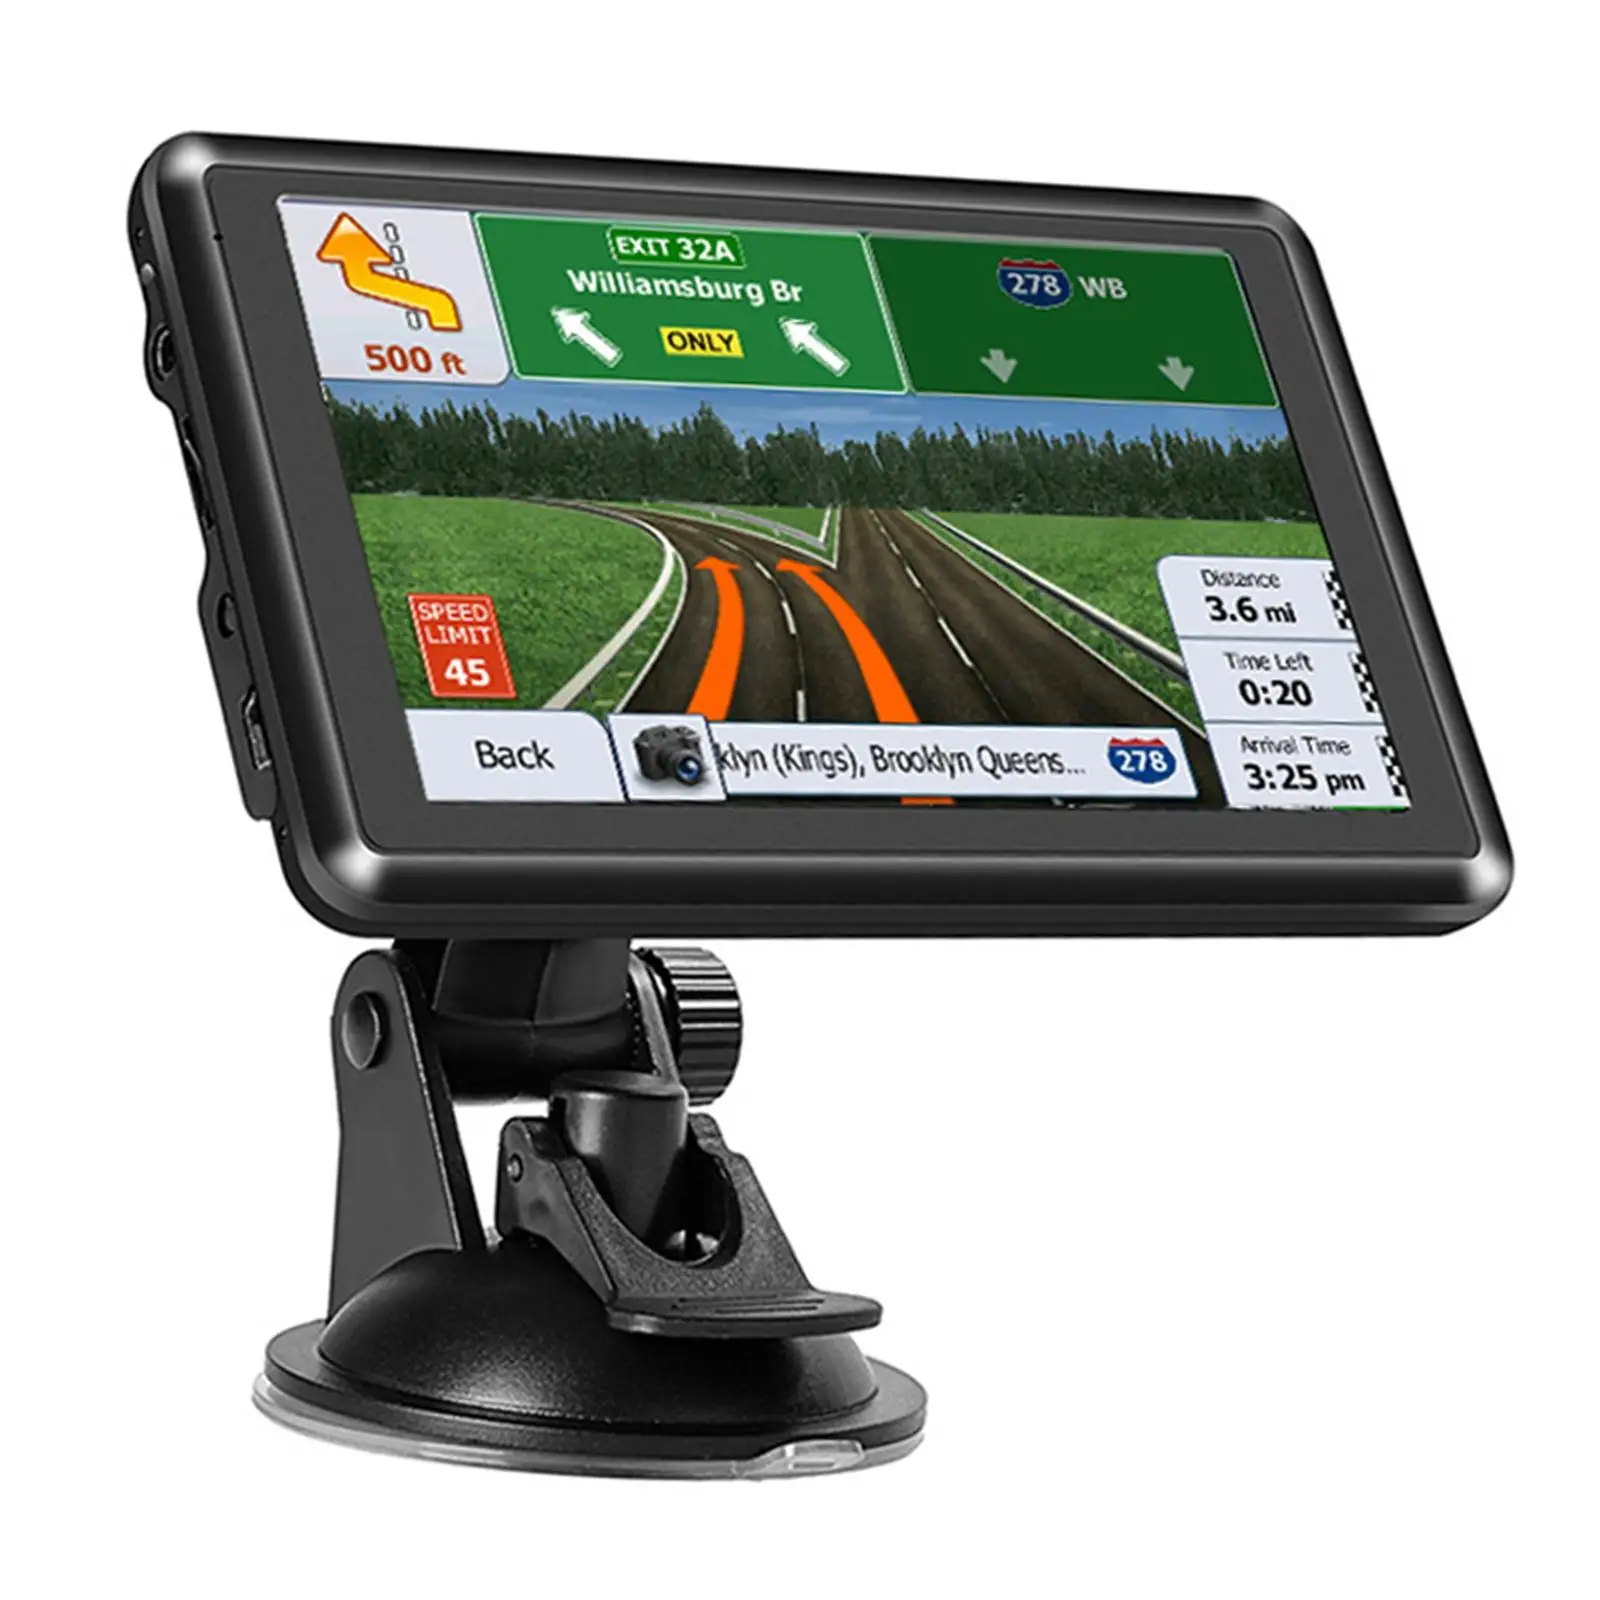 Multifunctional Truck GPS Navigation  inch Touchscreen 8GB 128 MB GPS Device